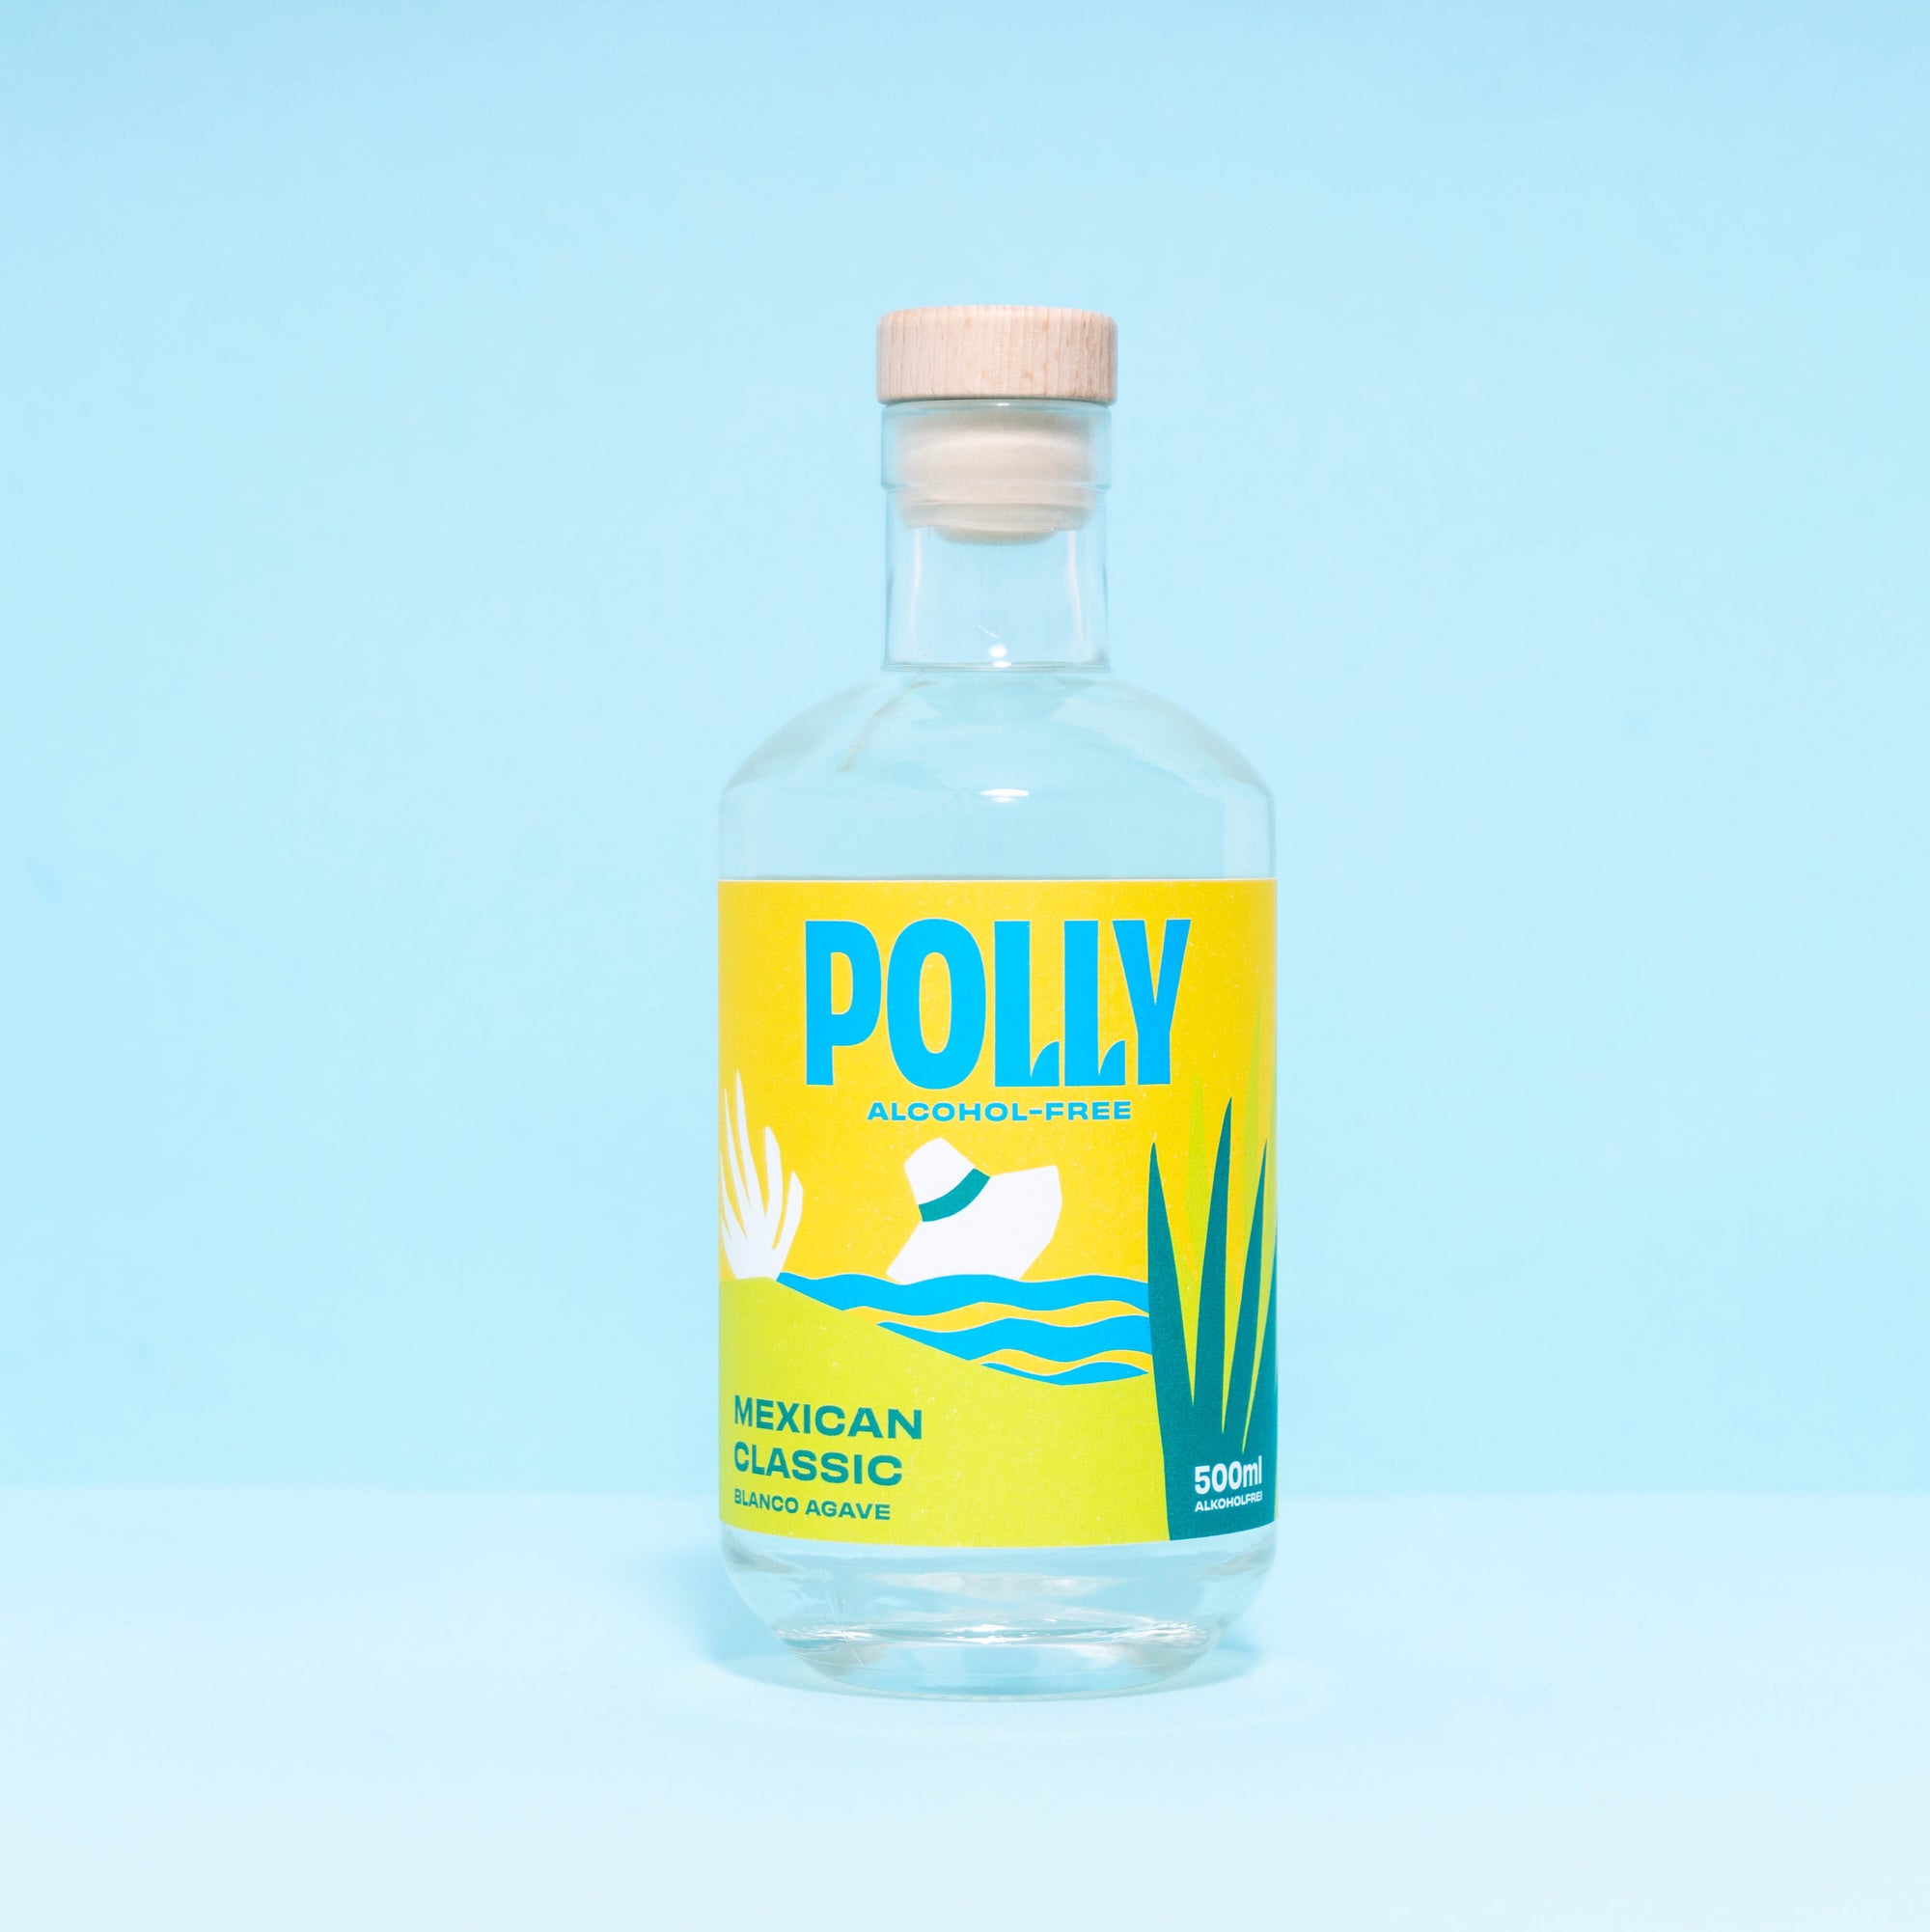 POLLY Mexican Classic 500 ml - alcohol-free tequila alternative